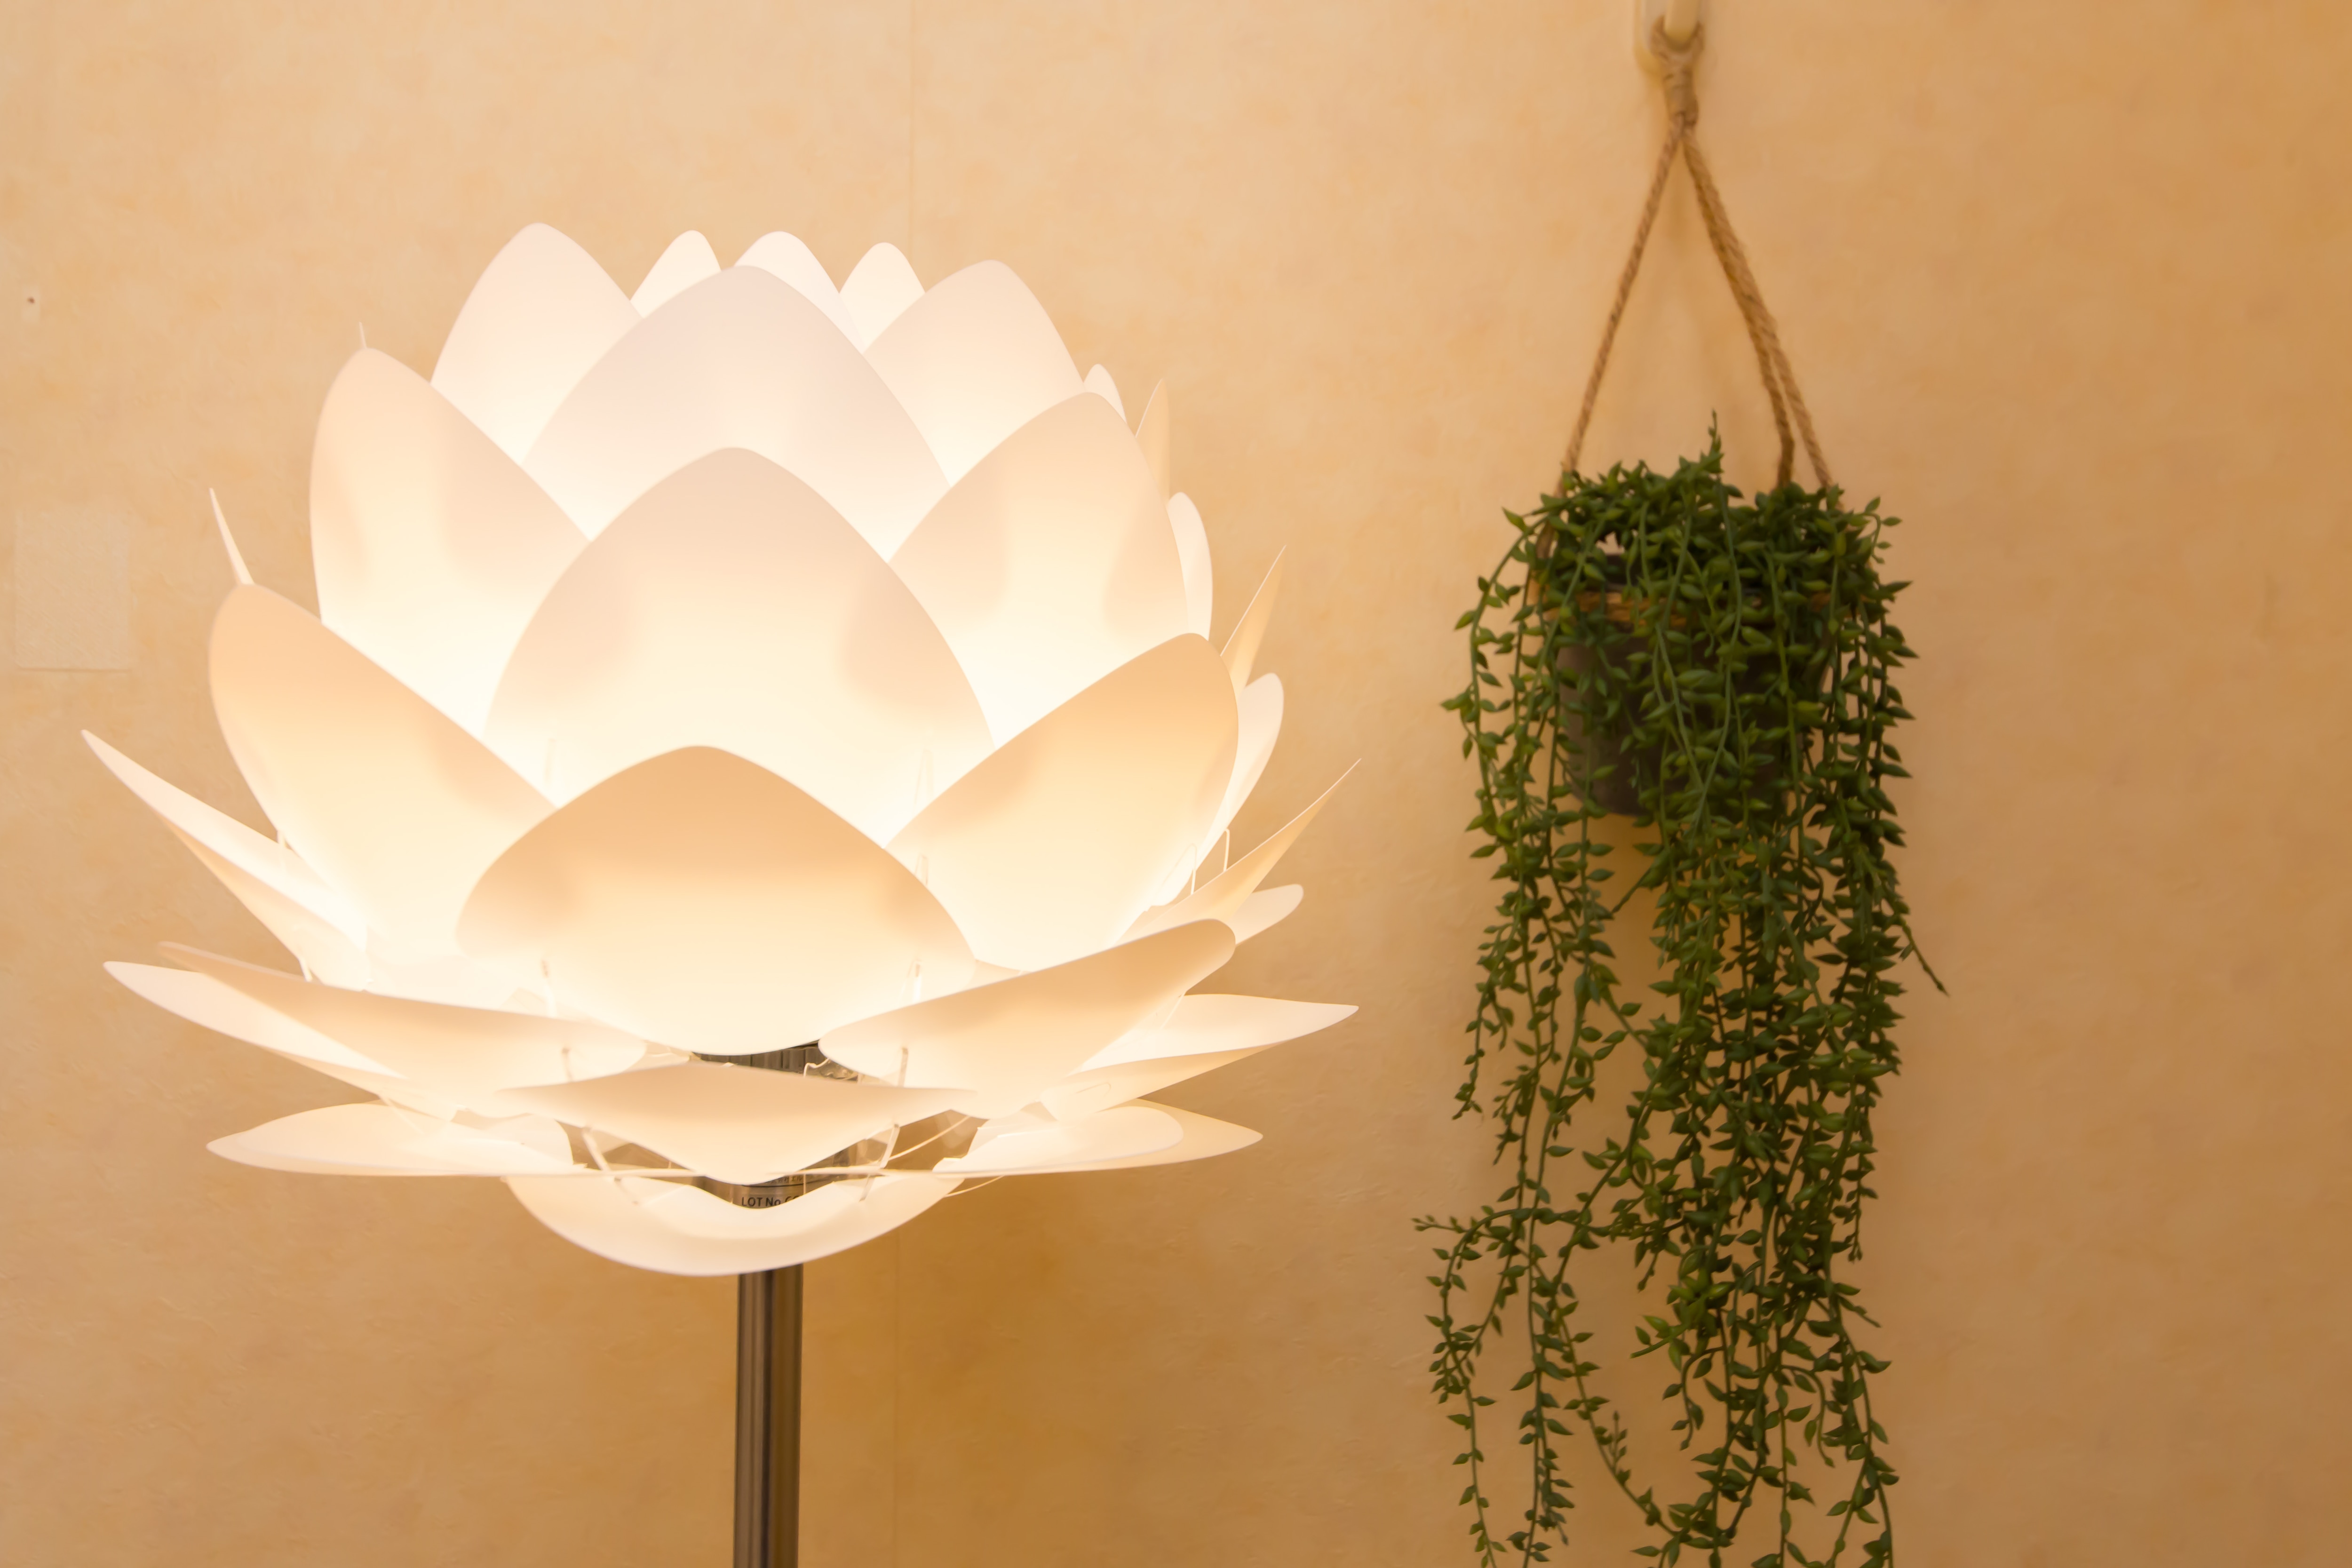 There are also stylish lotus flower-shaped room lamps.